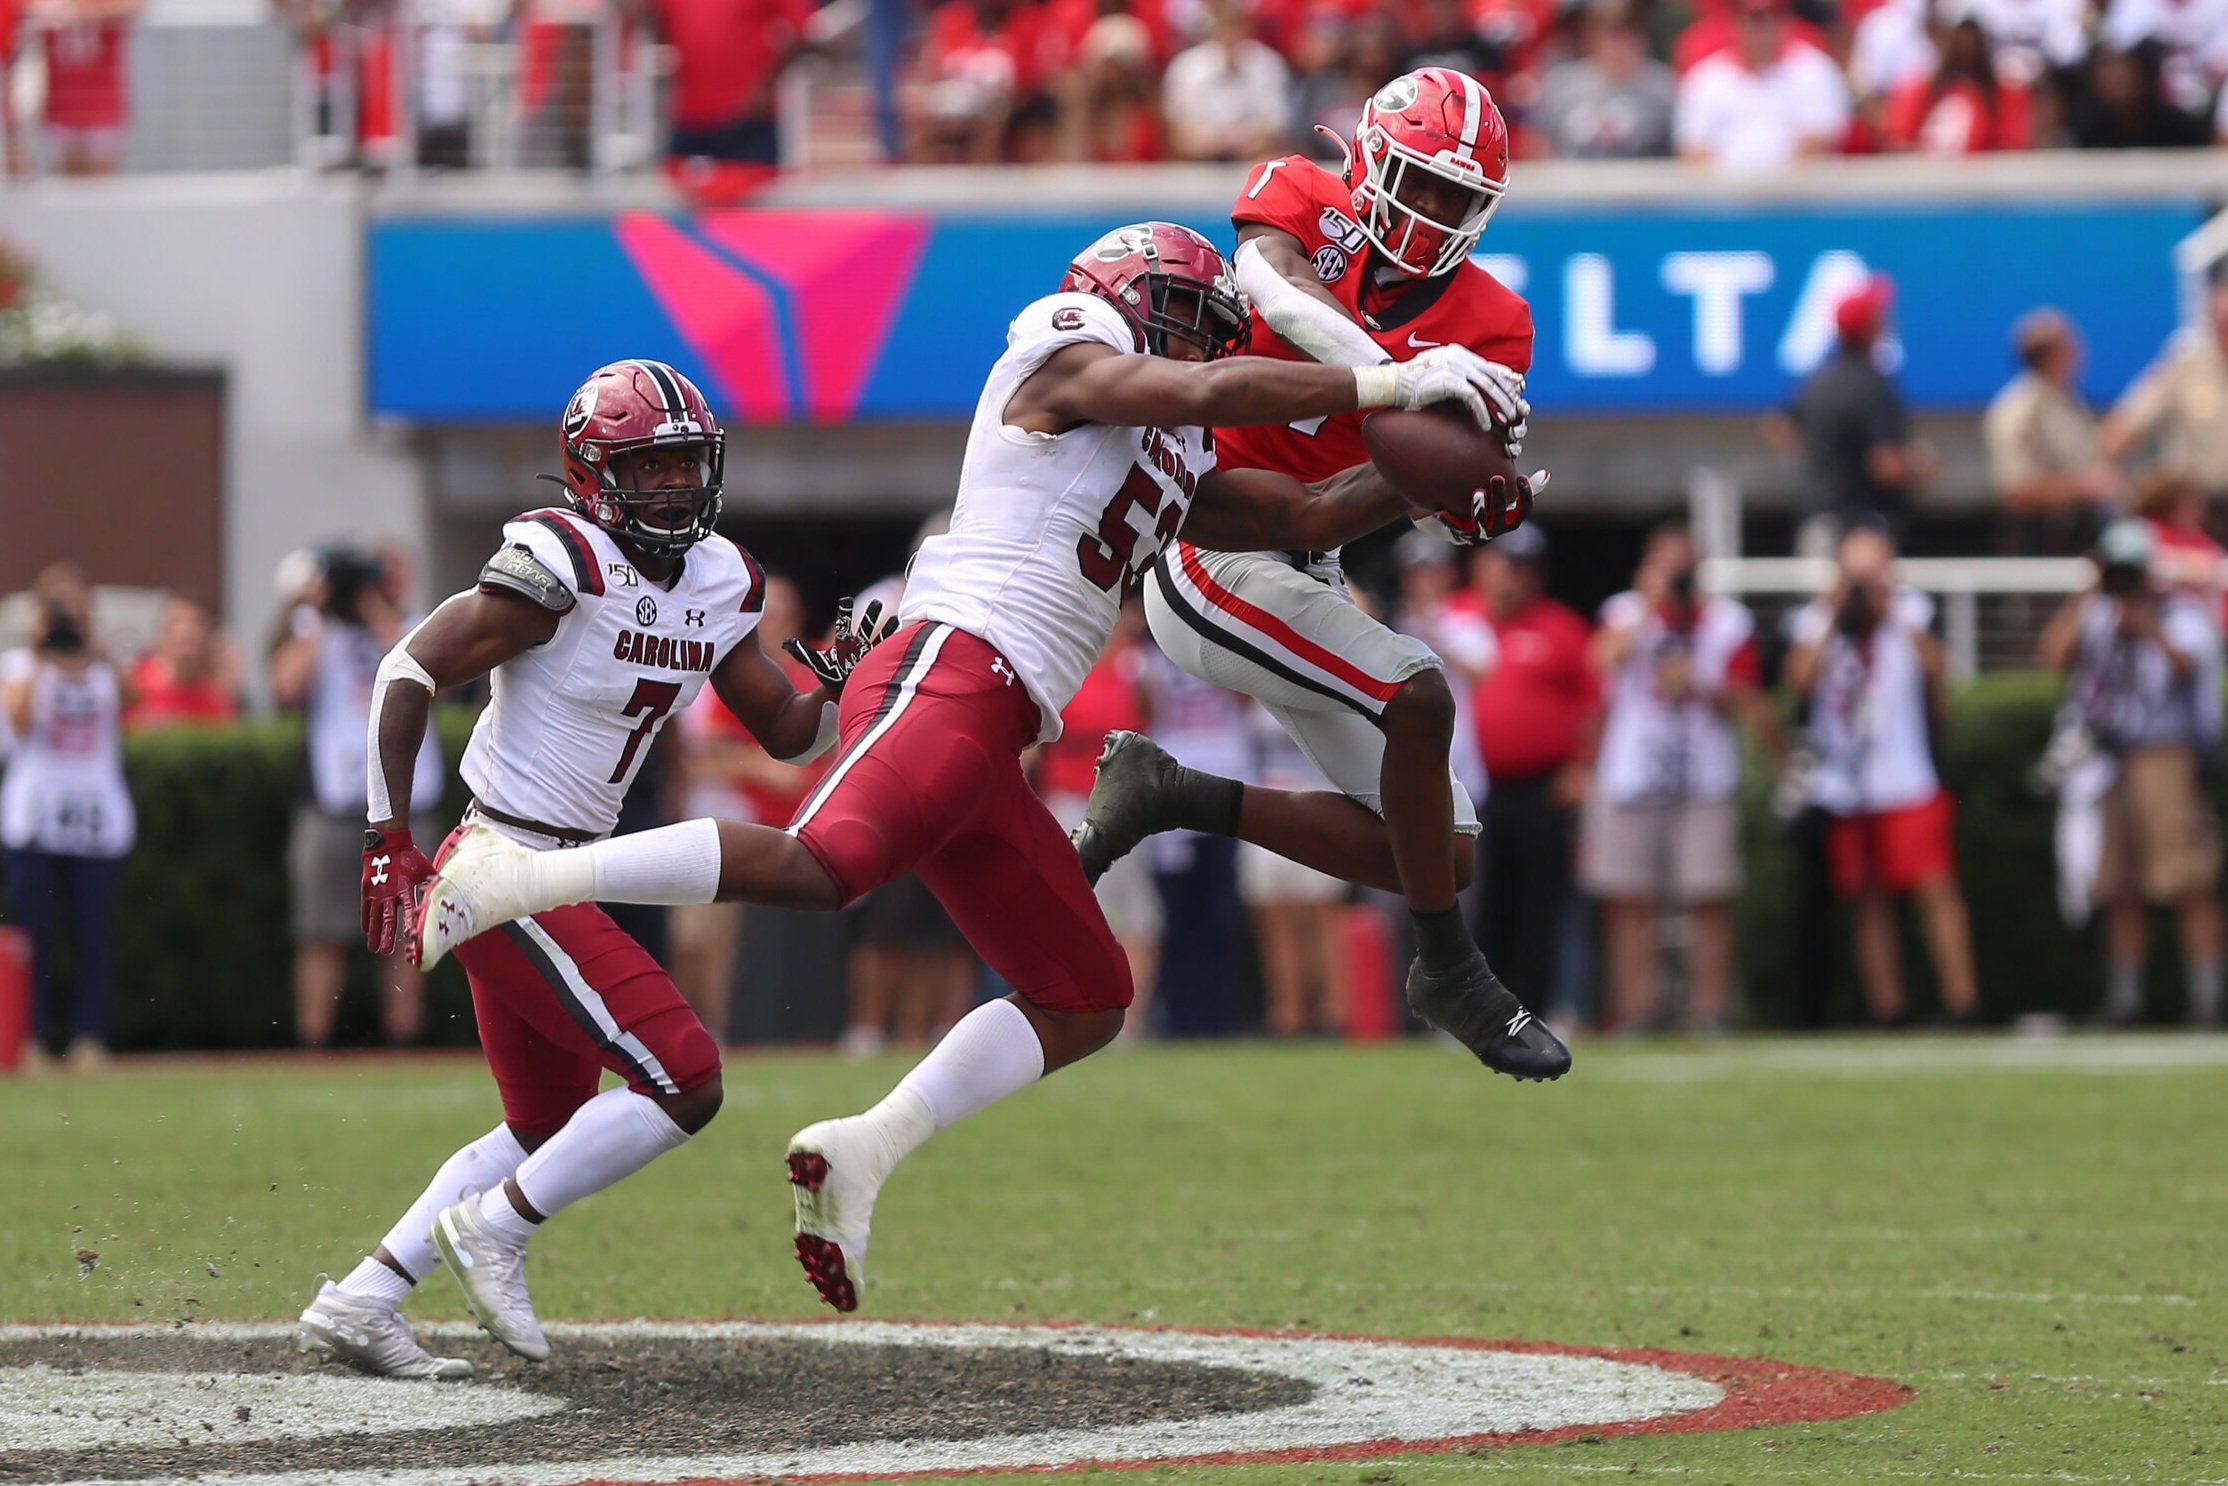  South Carolina linebacker Ernest Jones snatches the ball from Georgia wide receiver George Pickens (1) during a game on Oct. 12, 2019, in Sanford Stadium in Athens, Georgia. The Bulldogs lost in overtime 20-17. (Photo/Julian Alexander) 